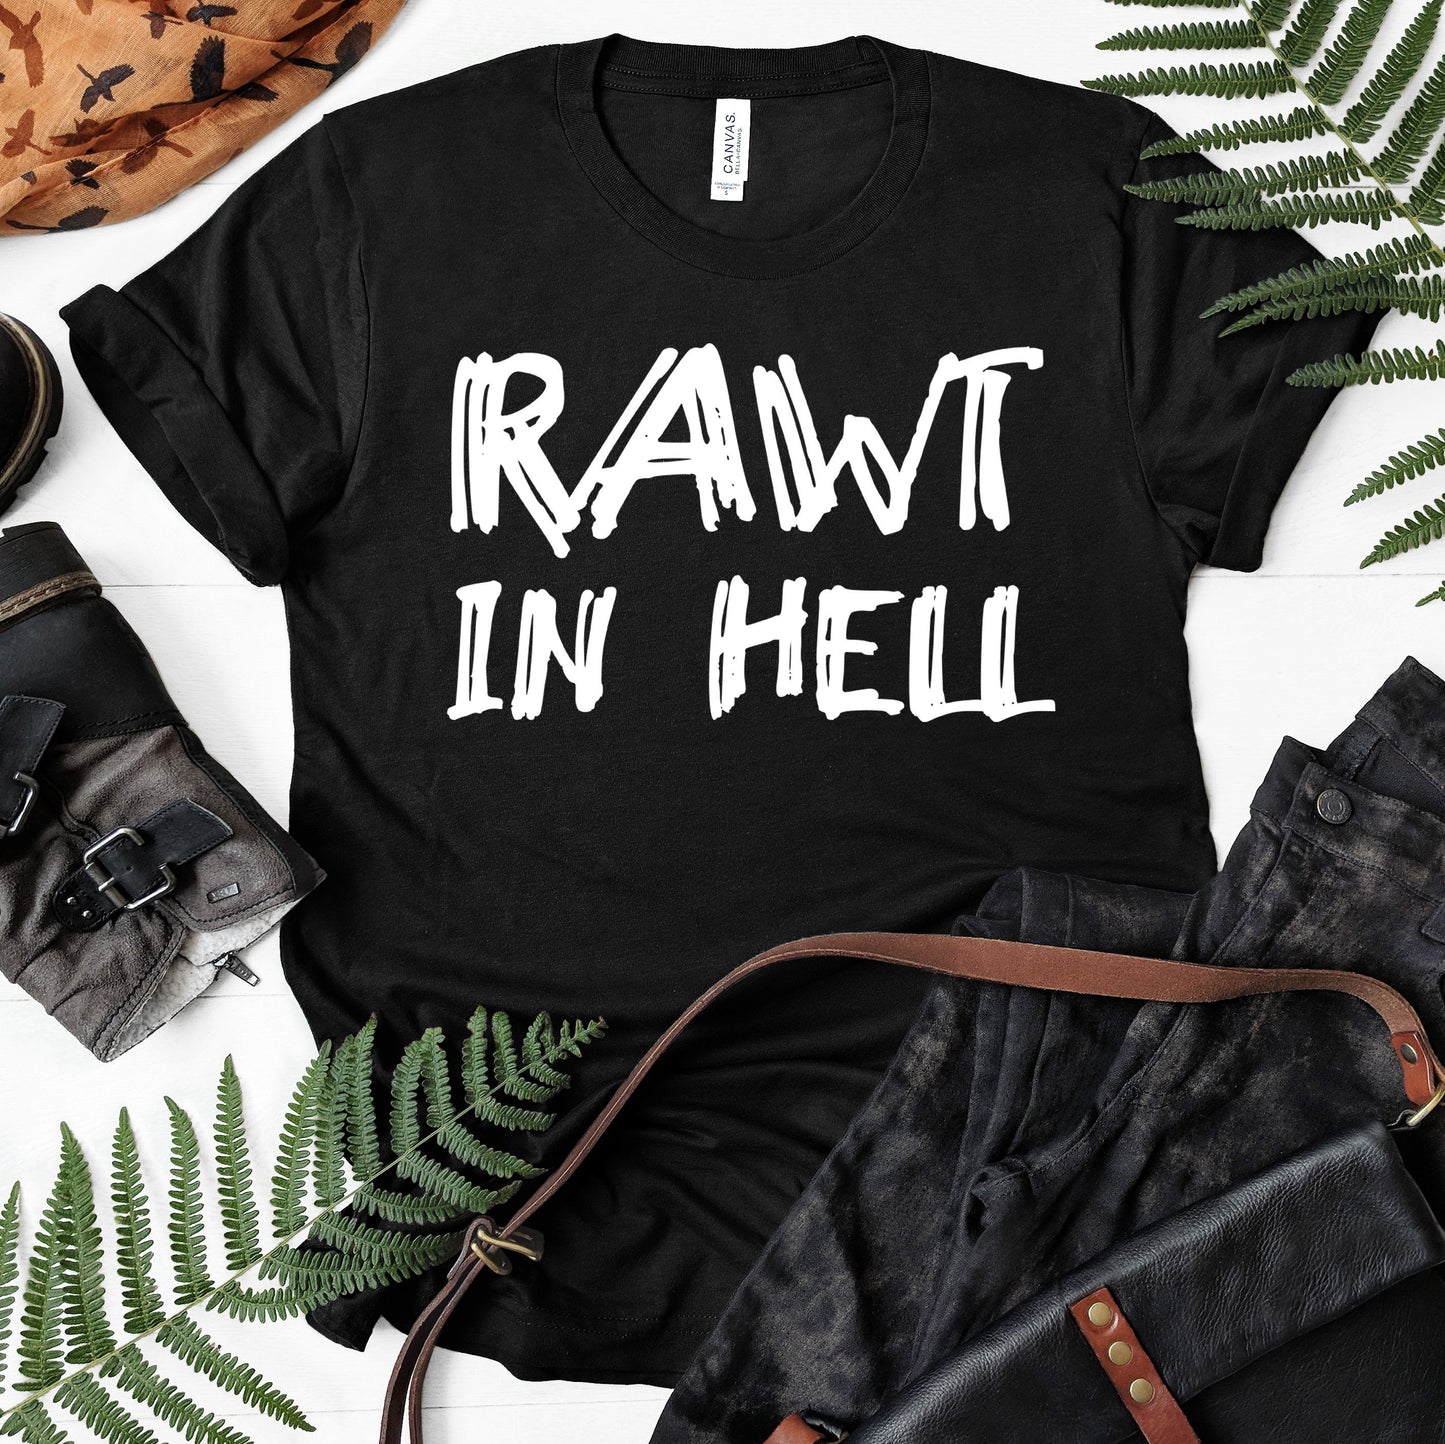 Rawt In Hell | Brittany Cartwright Quote | Unisex Short Sleeved Shirt | Multiple Color Options | Made To Order